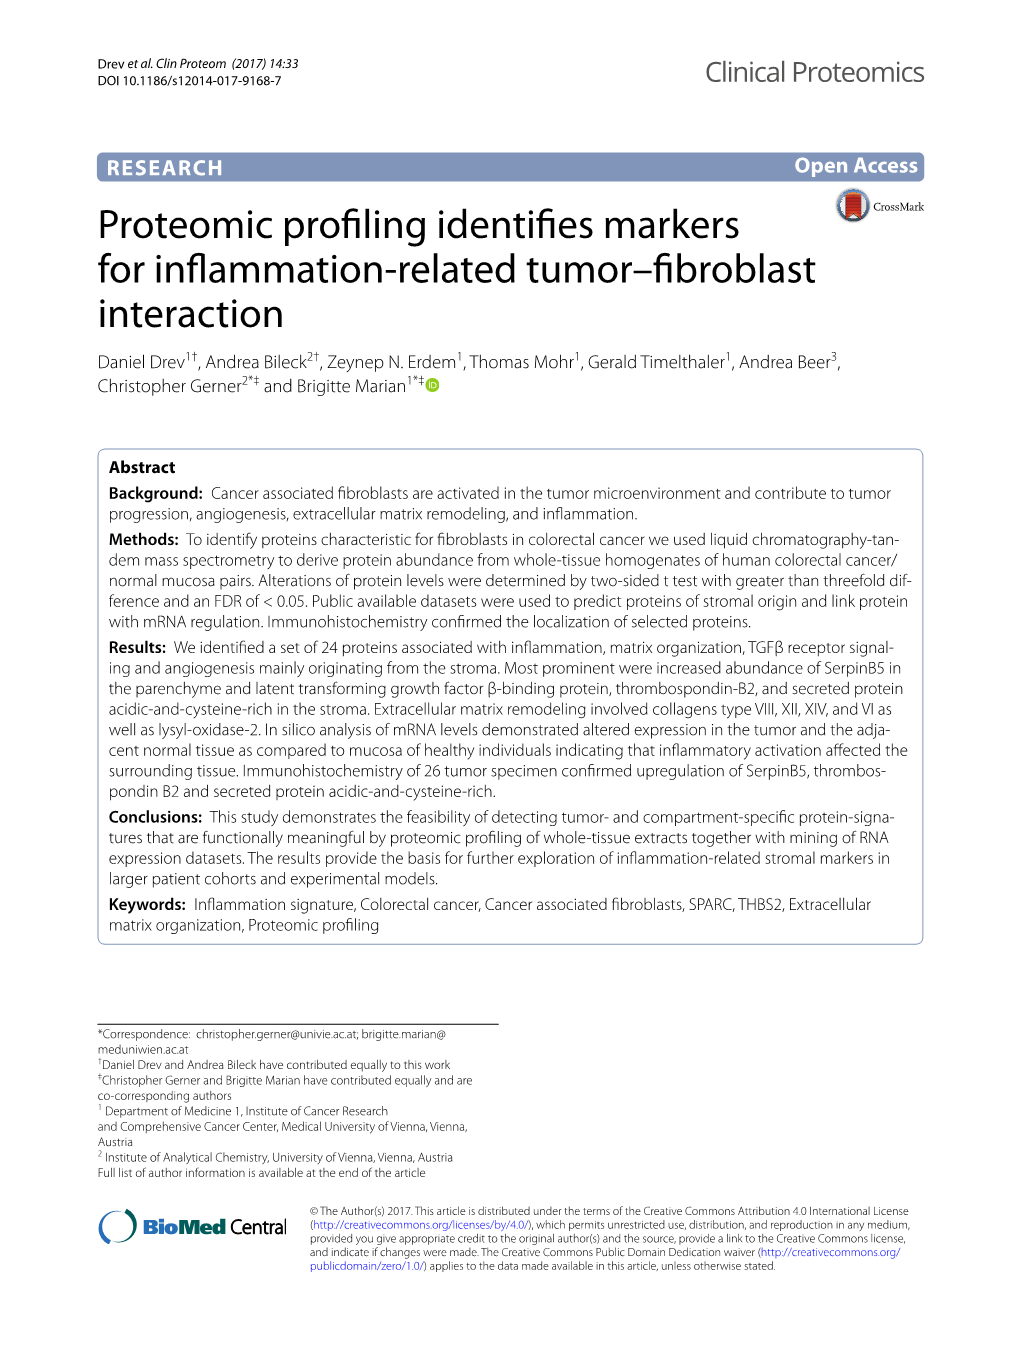 Proteomic Profiling Identifies Markers for Inflammation-Related Tumor